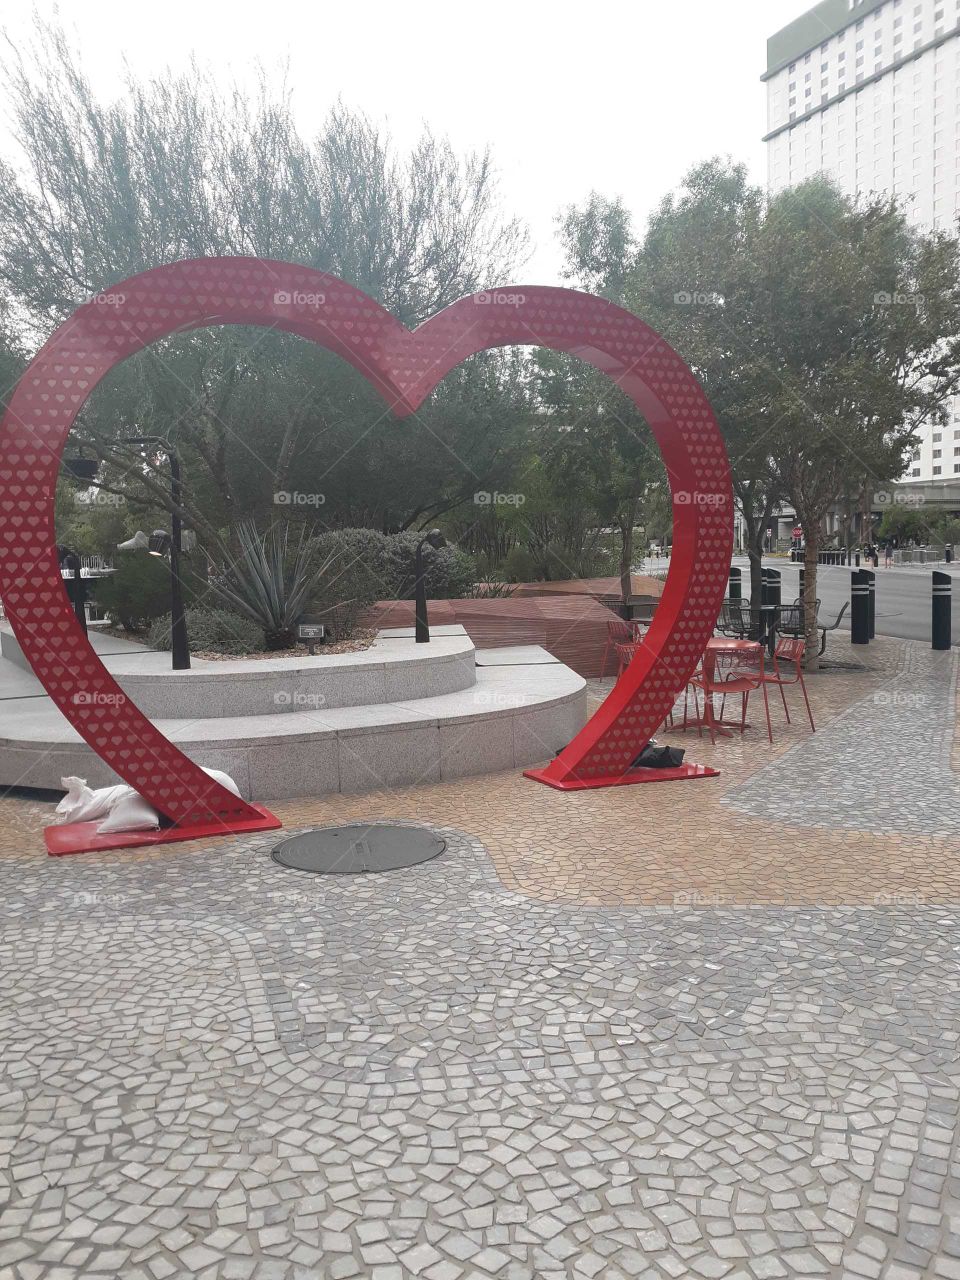 A heart display in The Park